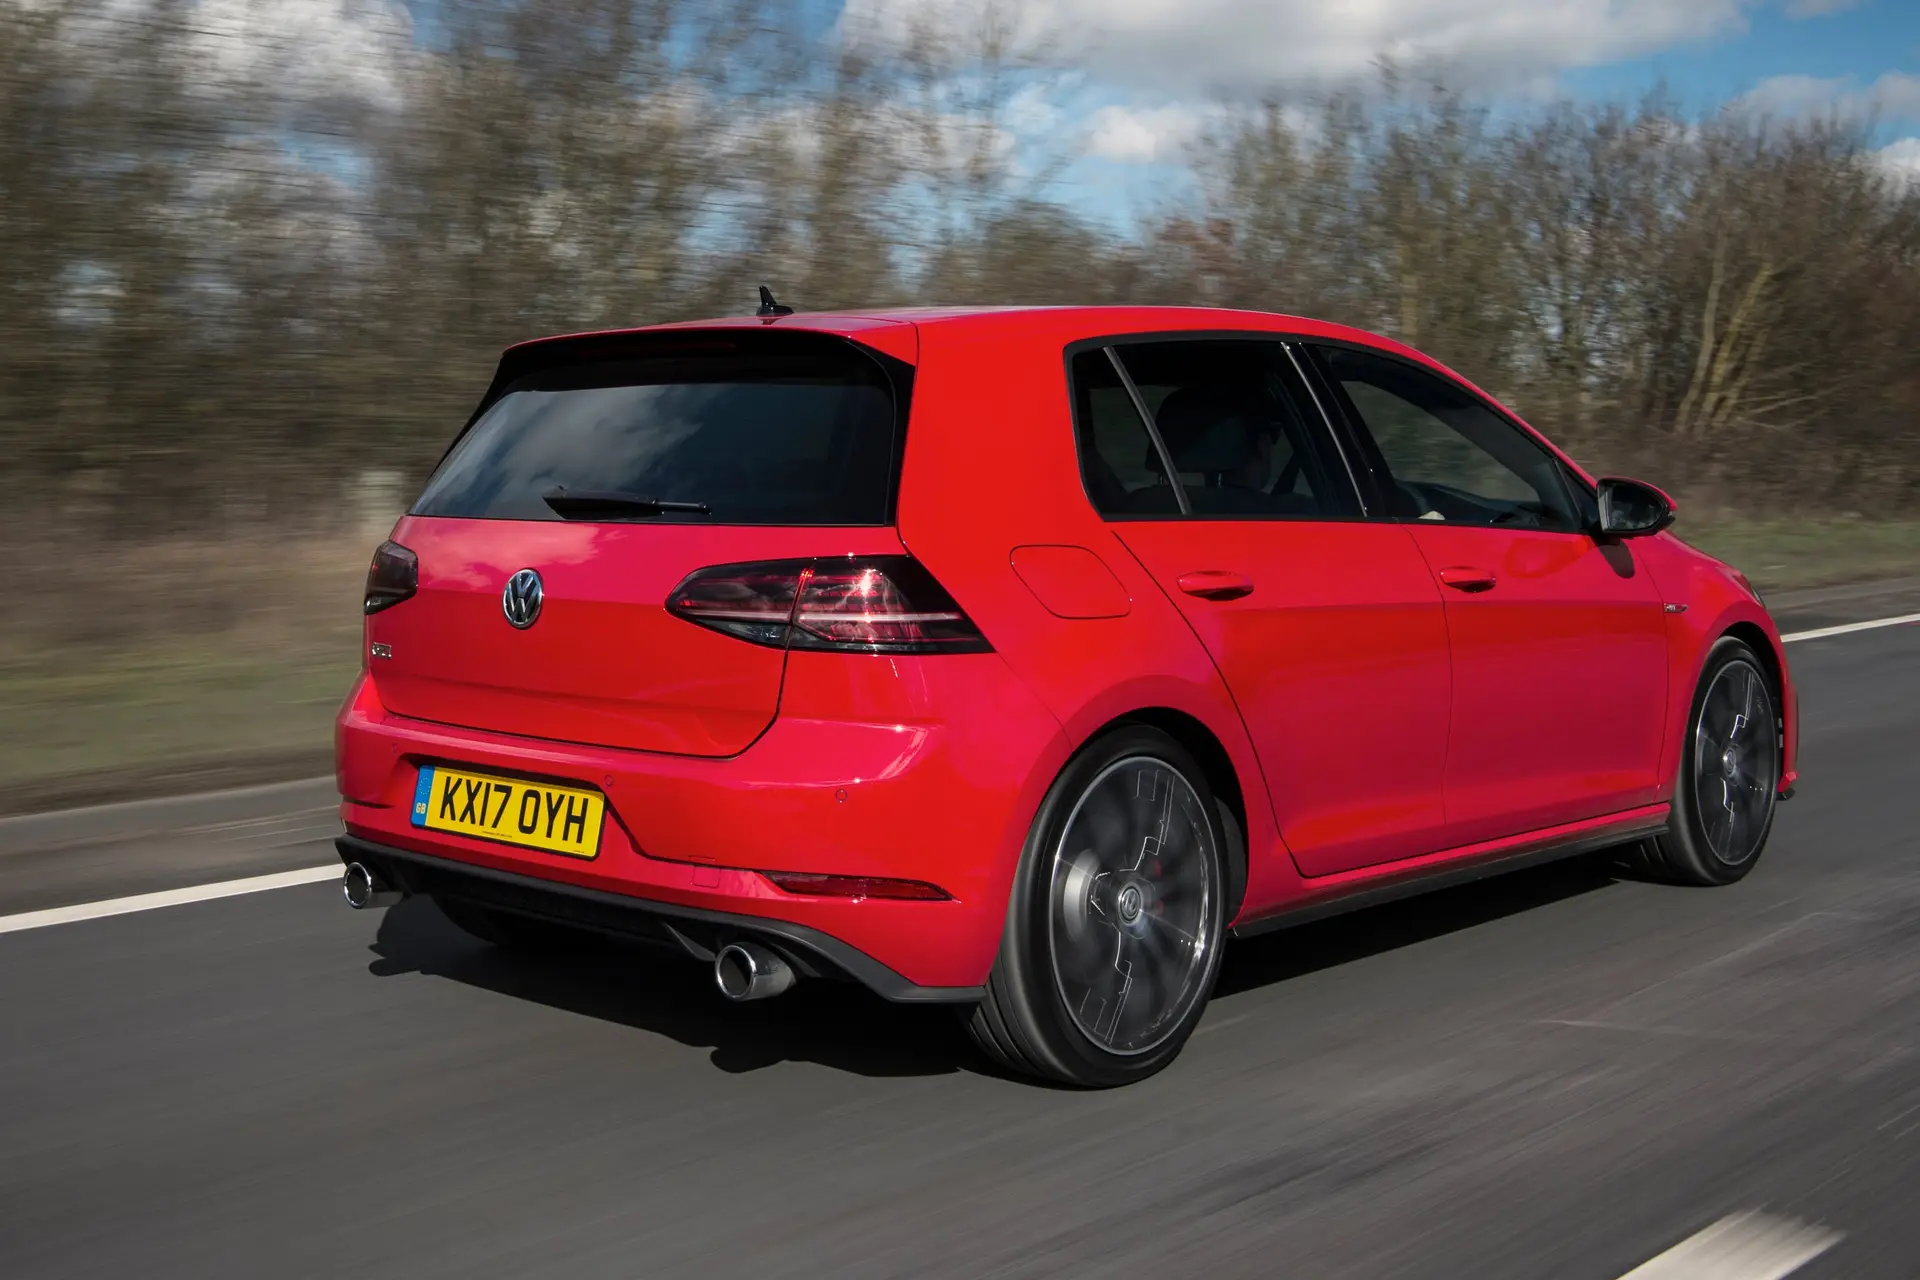 2019 Volkswagen Golf GTI Review, Pricing, and Specs